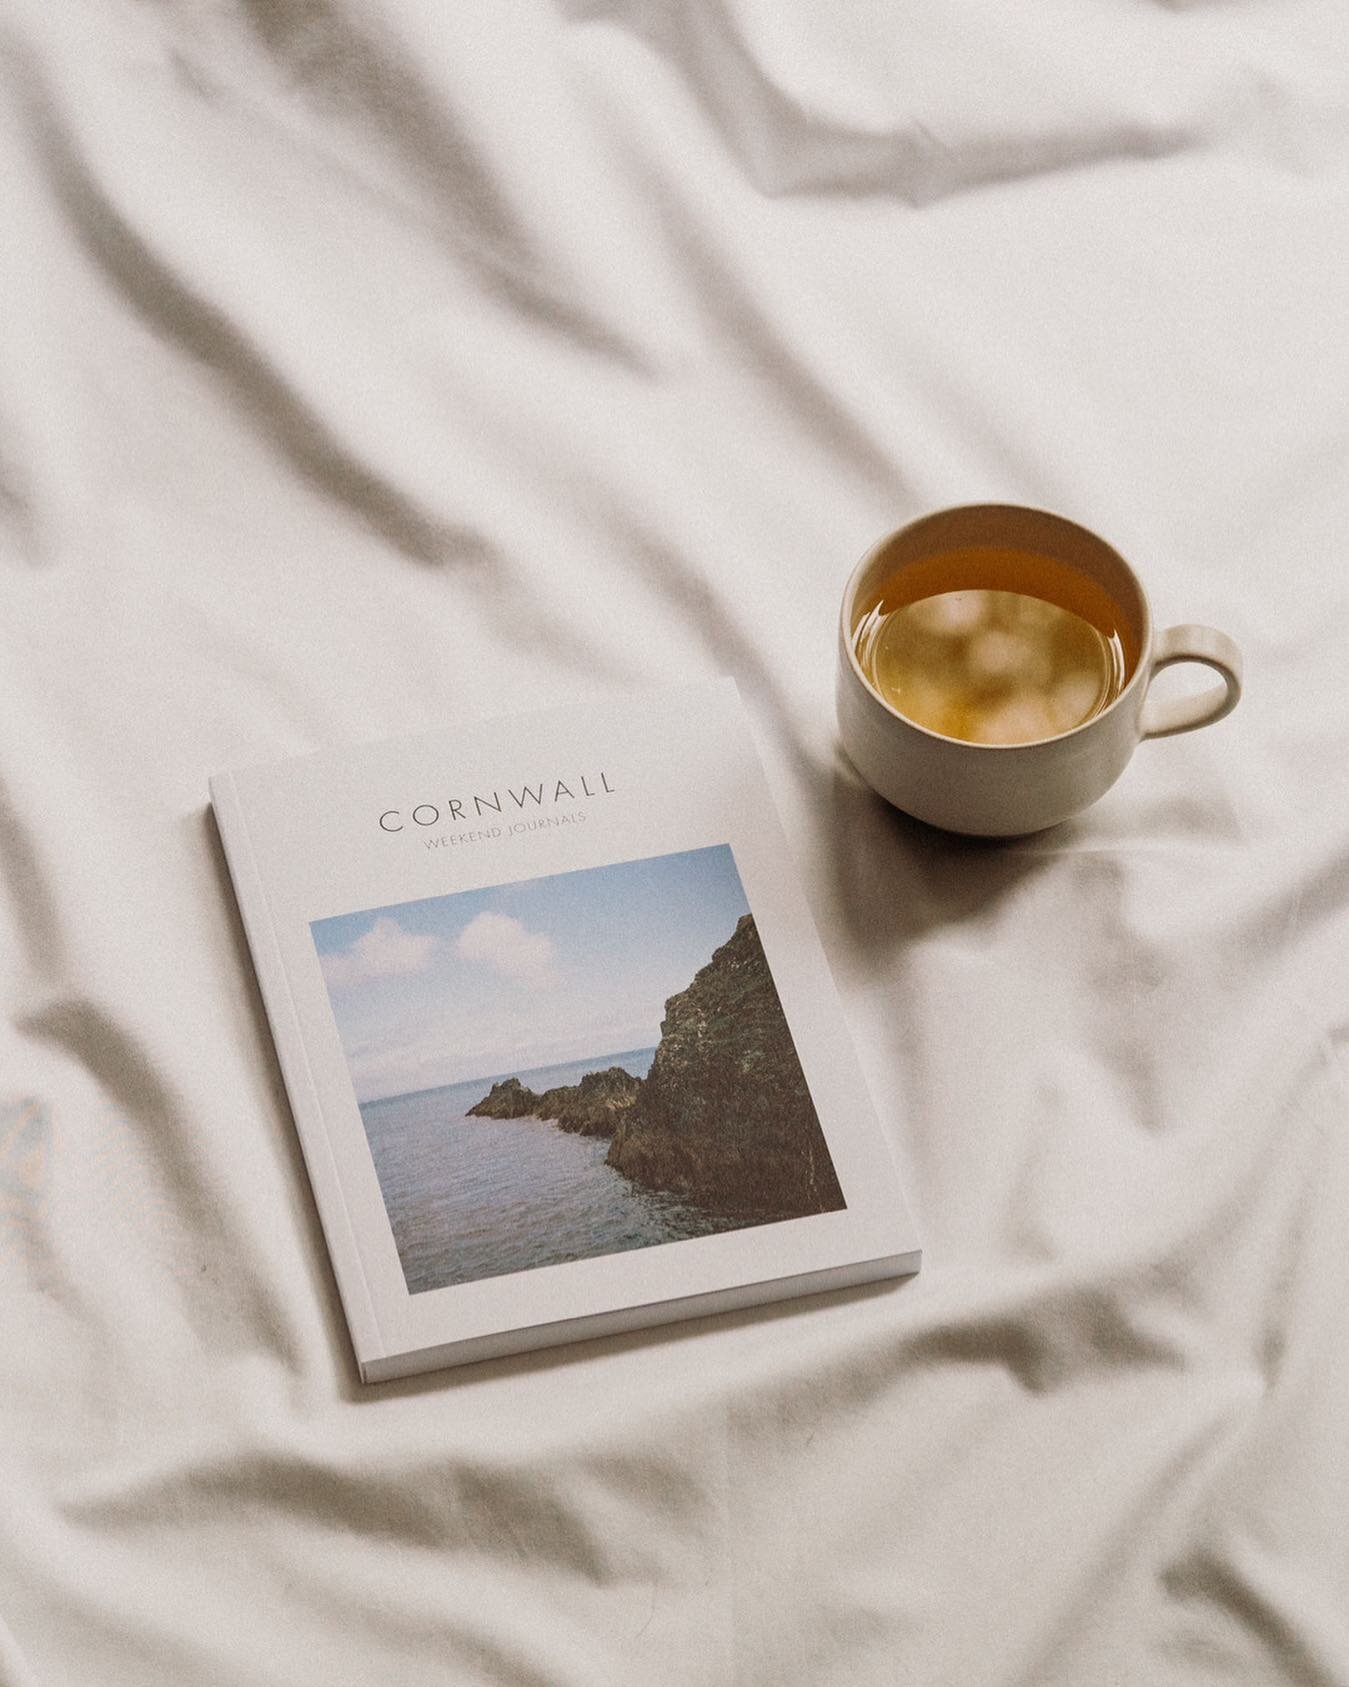 Still dreaming of Cornwall, because the cooler months are our favourite on coast 🌊 crisp days rugged up warm, exploring a quieter Cornwall. 

___________________
#smallbusiness #minimalhomeware #homestore #scandihome #travelphotography #travelguide 